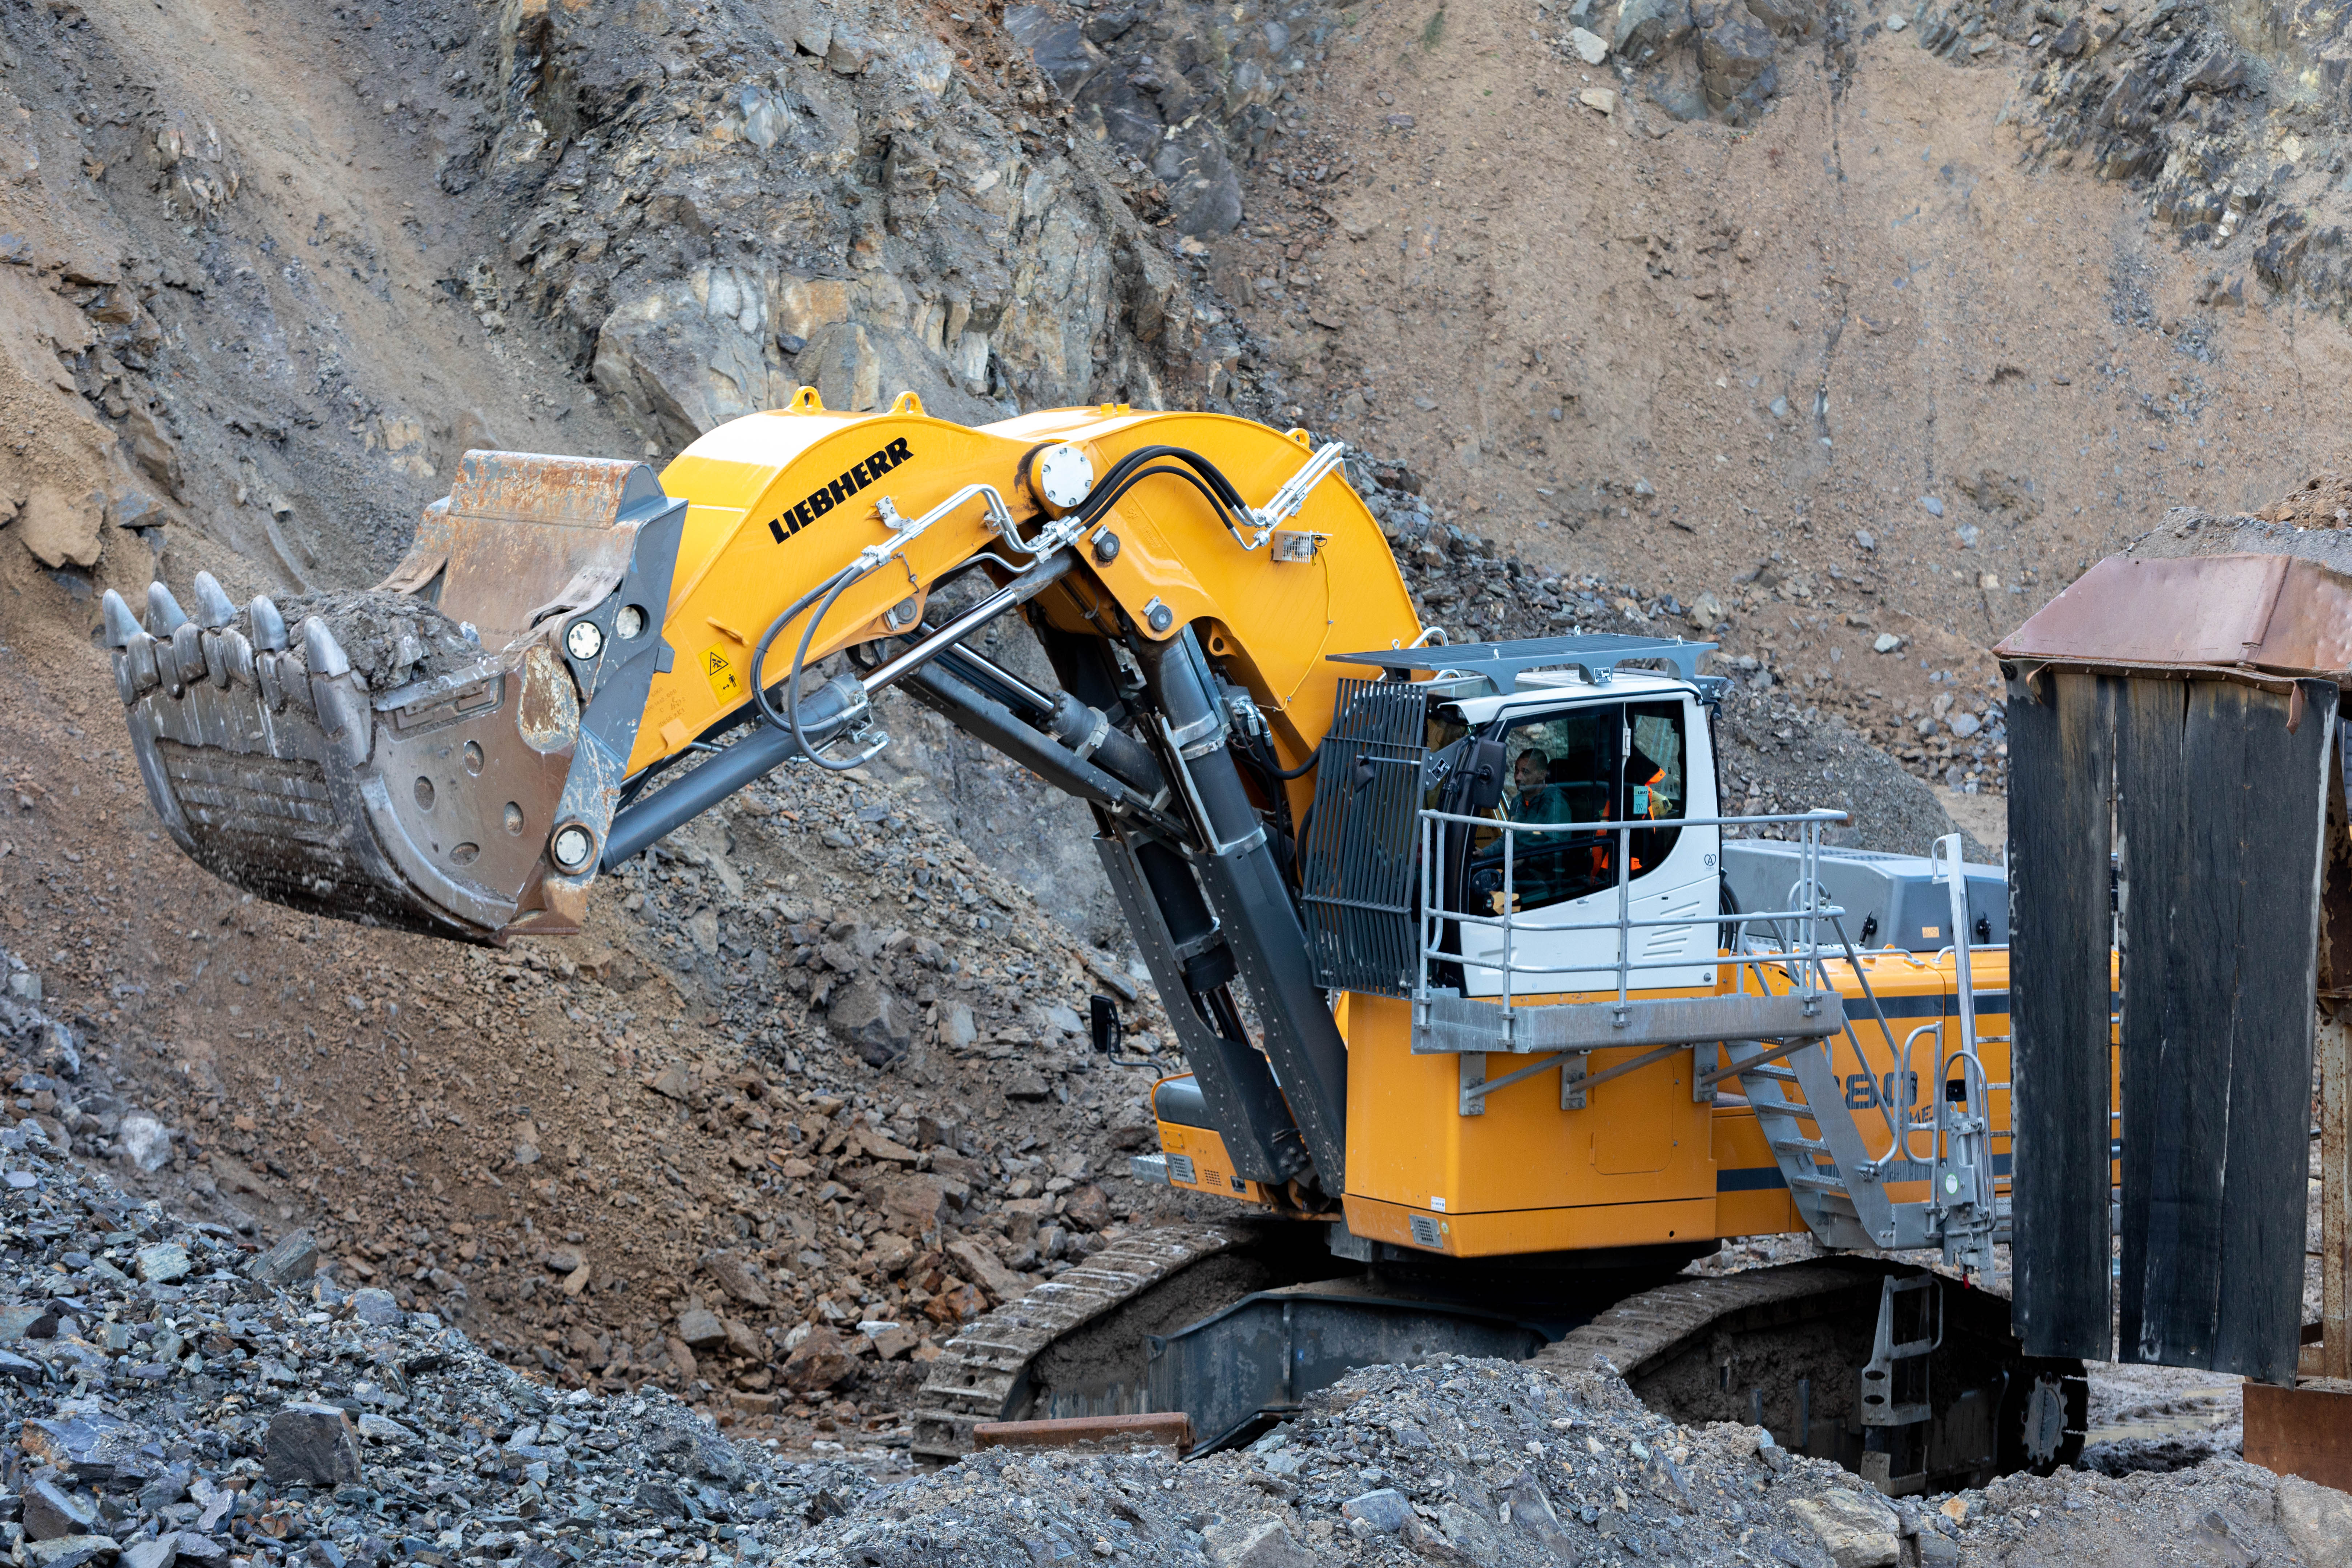 With a total production of around 800,000 tonnes of aggregate a year, Traineau seems more than satisfied with the R 980 SME excavator and its bottom dump shovel.